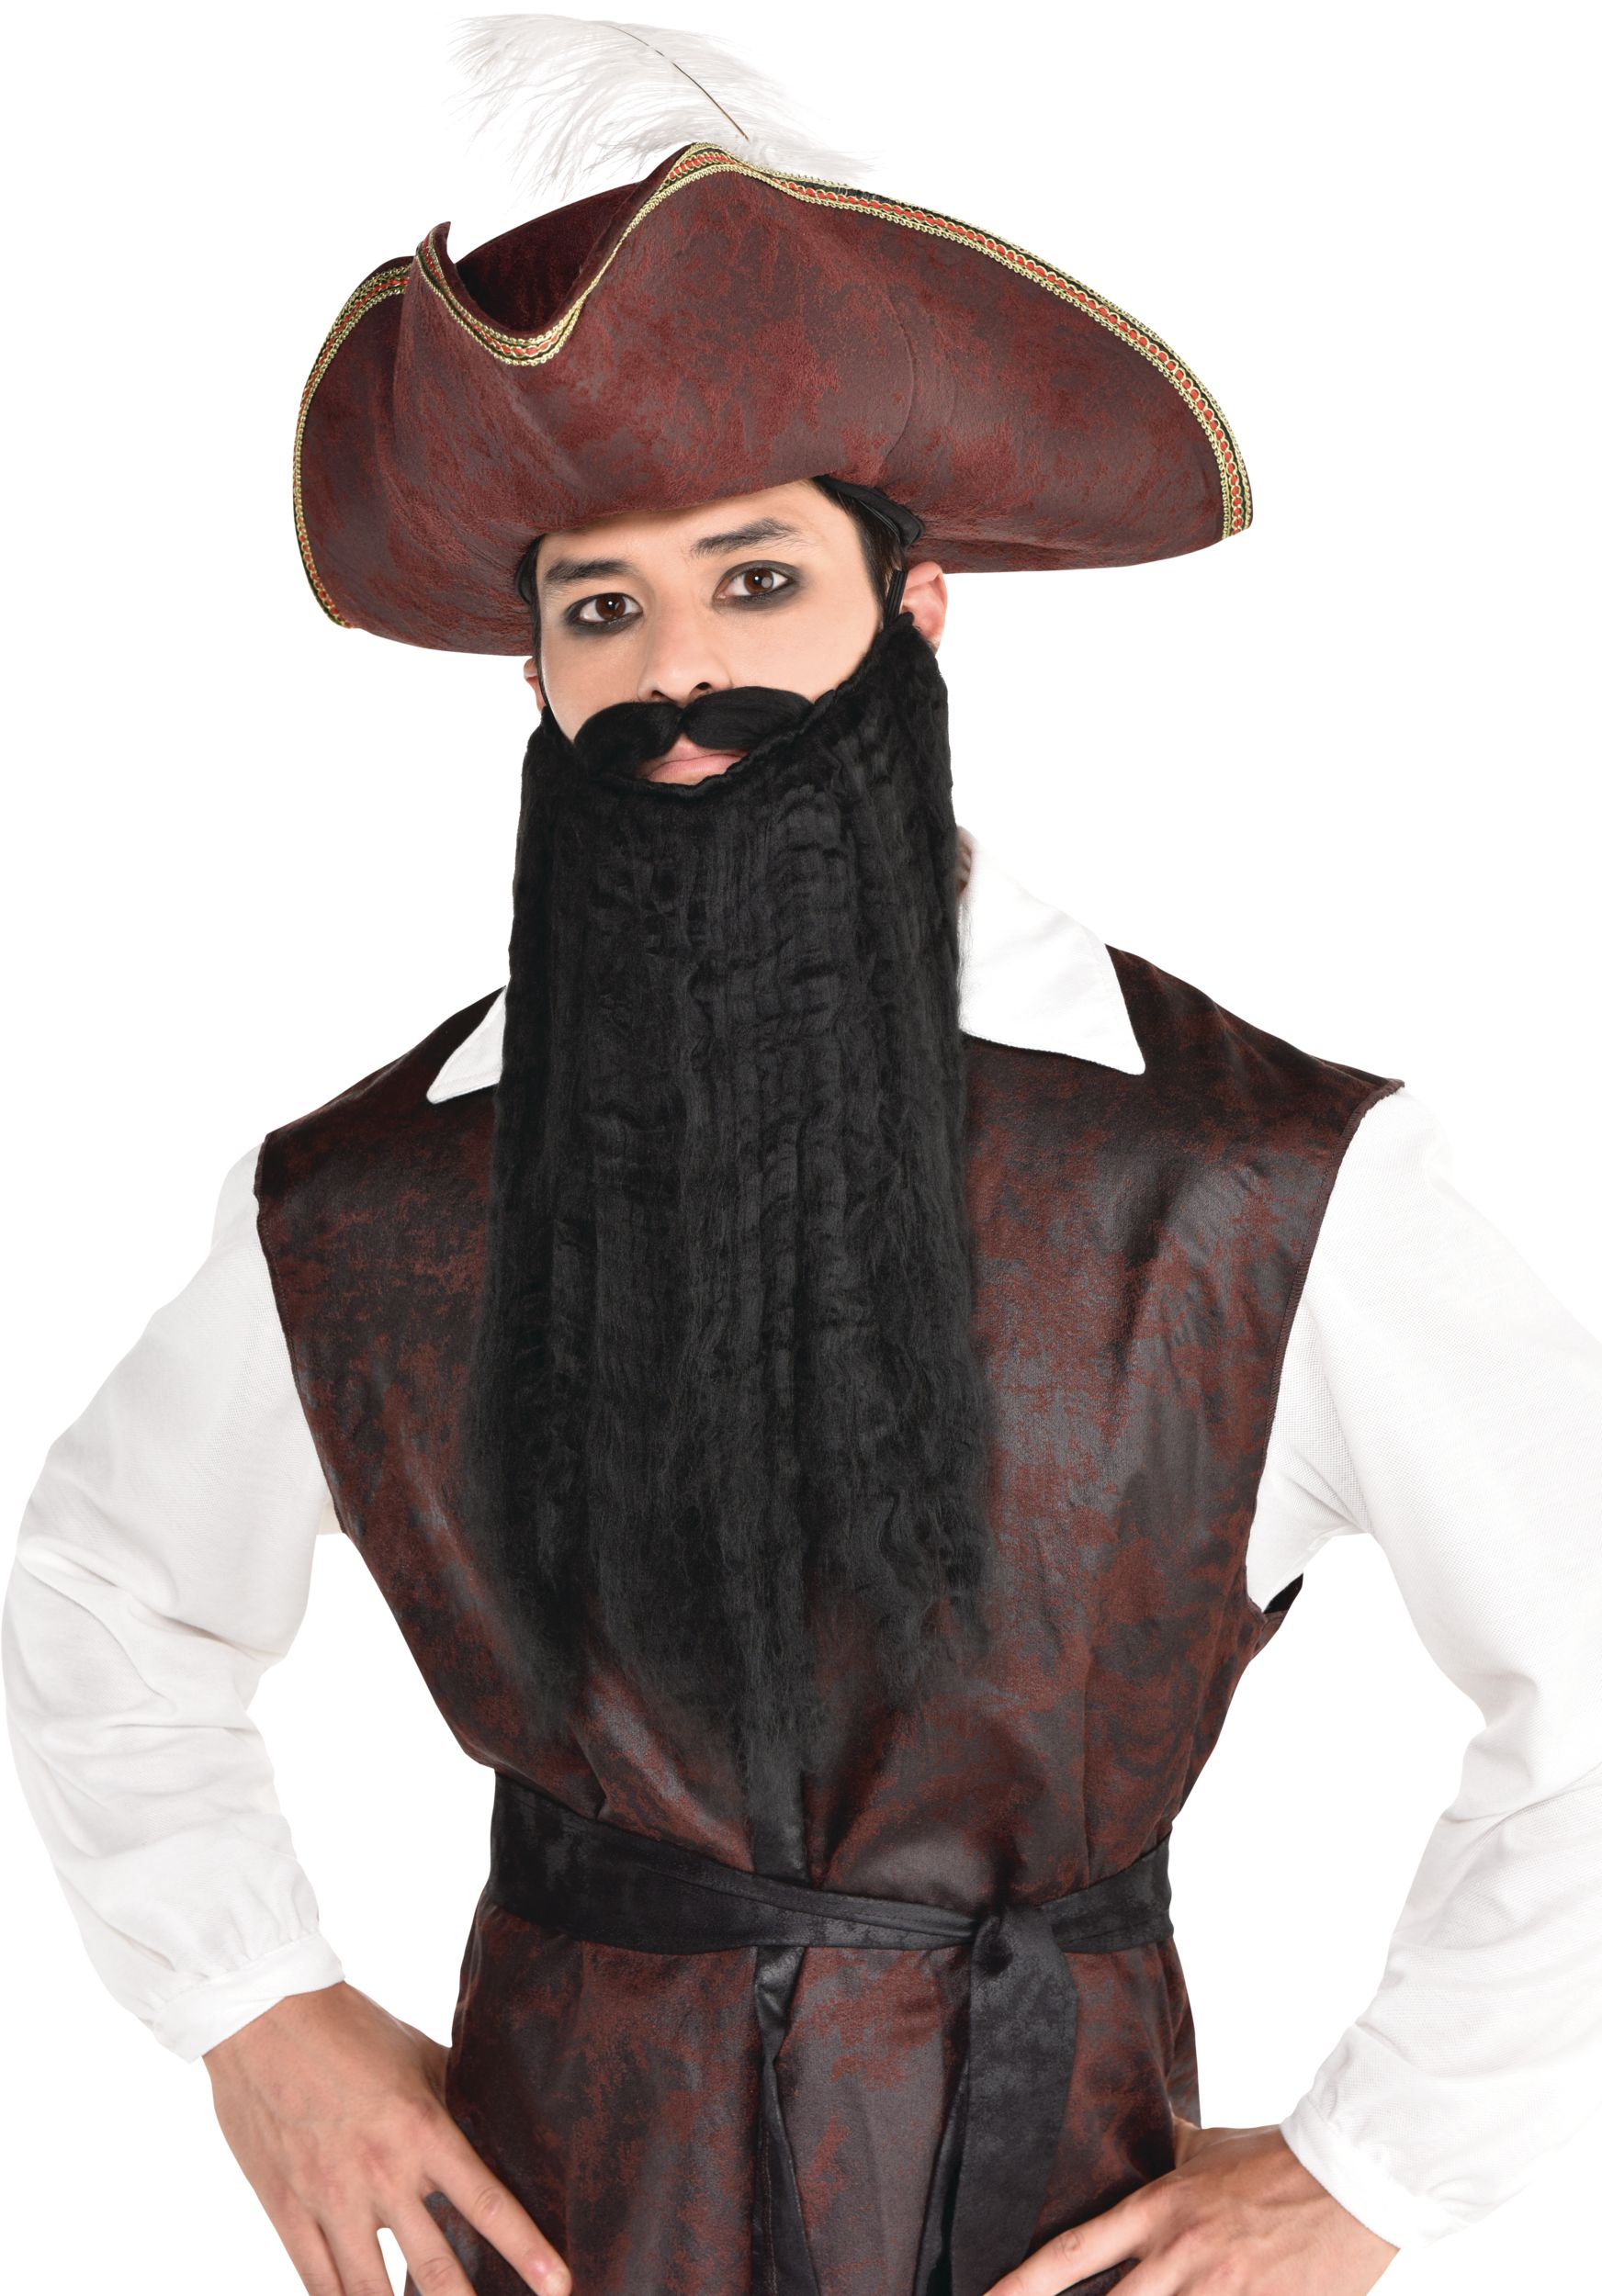 Pirate Long Hair Facial Hair Beard, Black, One Size, Wearable Costume  Accessory for Halloween